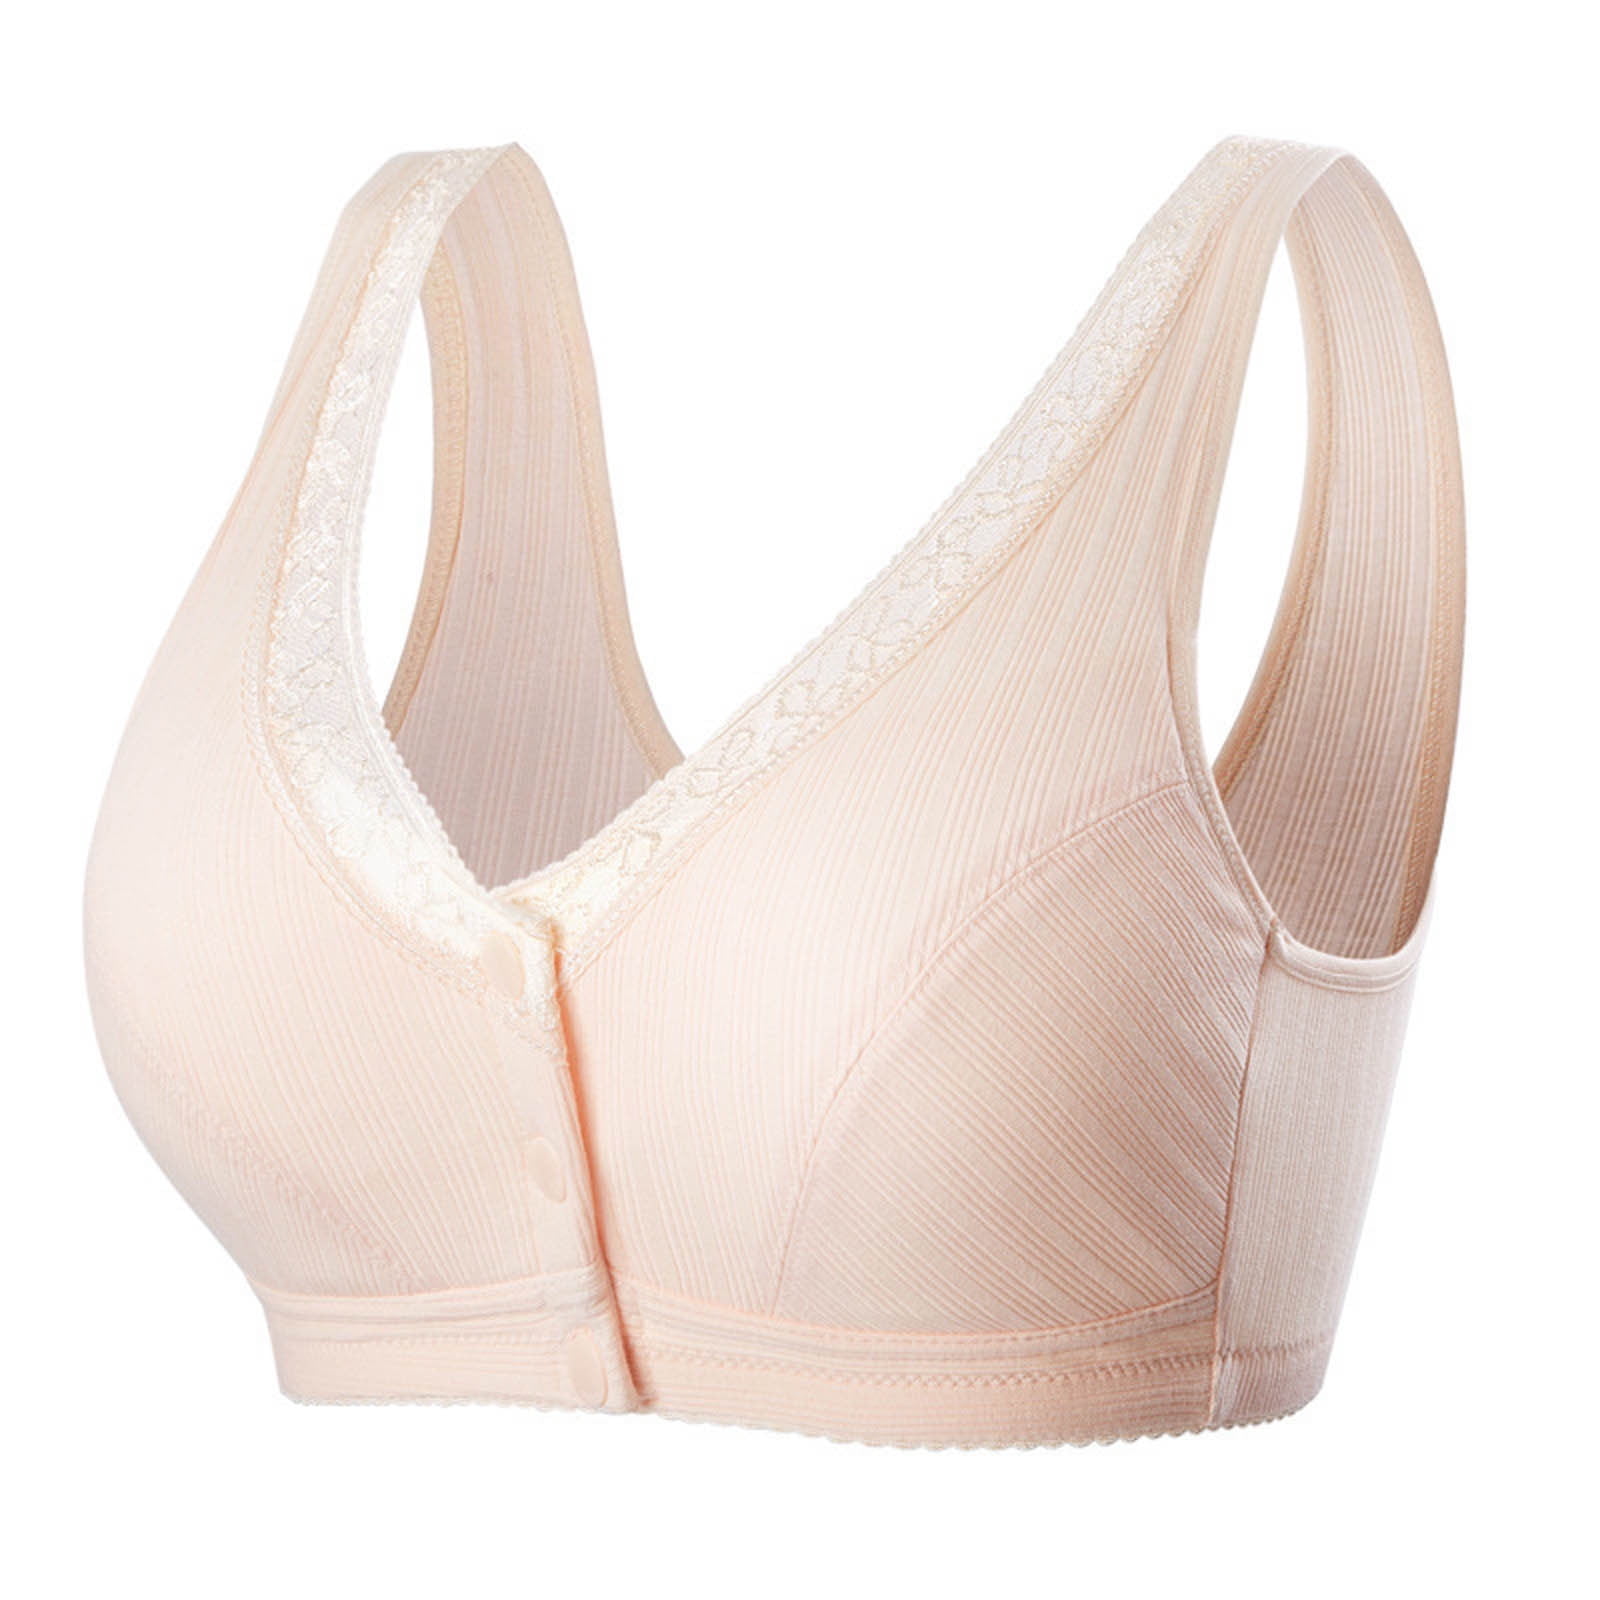 36 to 46BC One-Piece Plus Size Women Bra Front Open Breathable Thin  Underwear Lingerie B-91